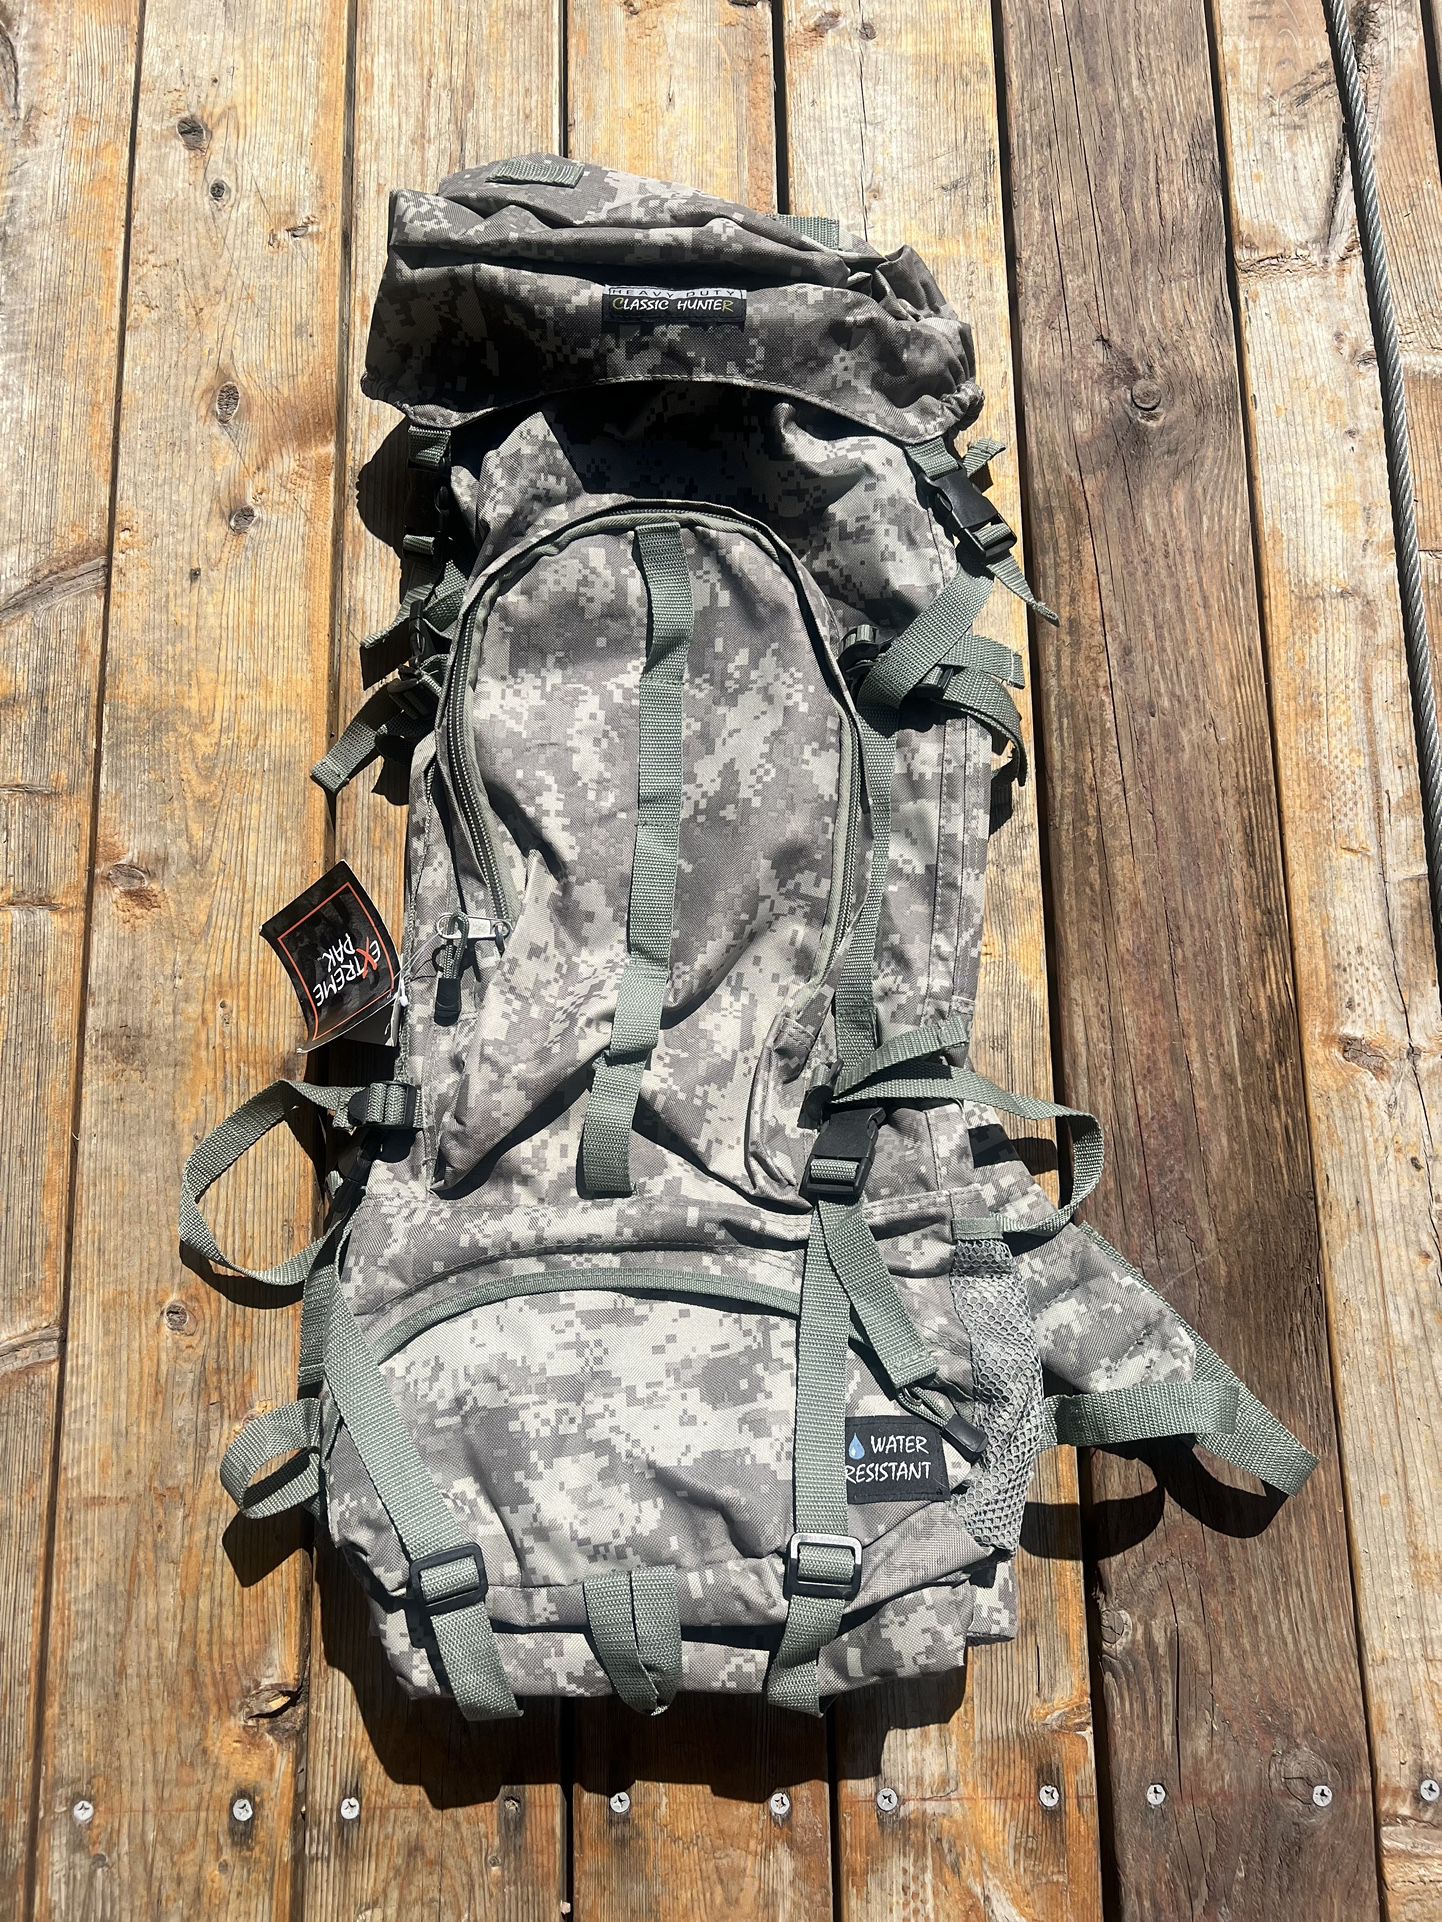 Heavy Duty Military Hiking/ Hunting Backpack - Water Resistant - Not used - Accepting OFFERS!!